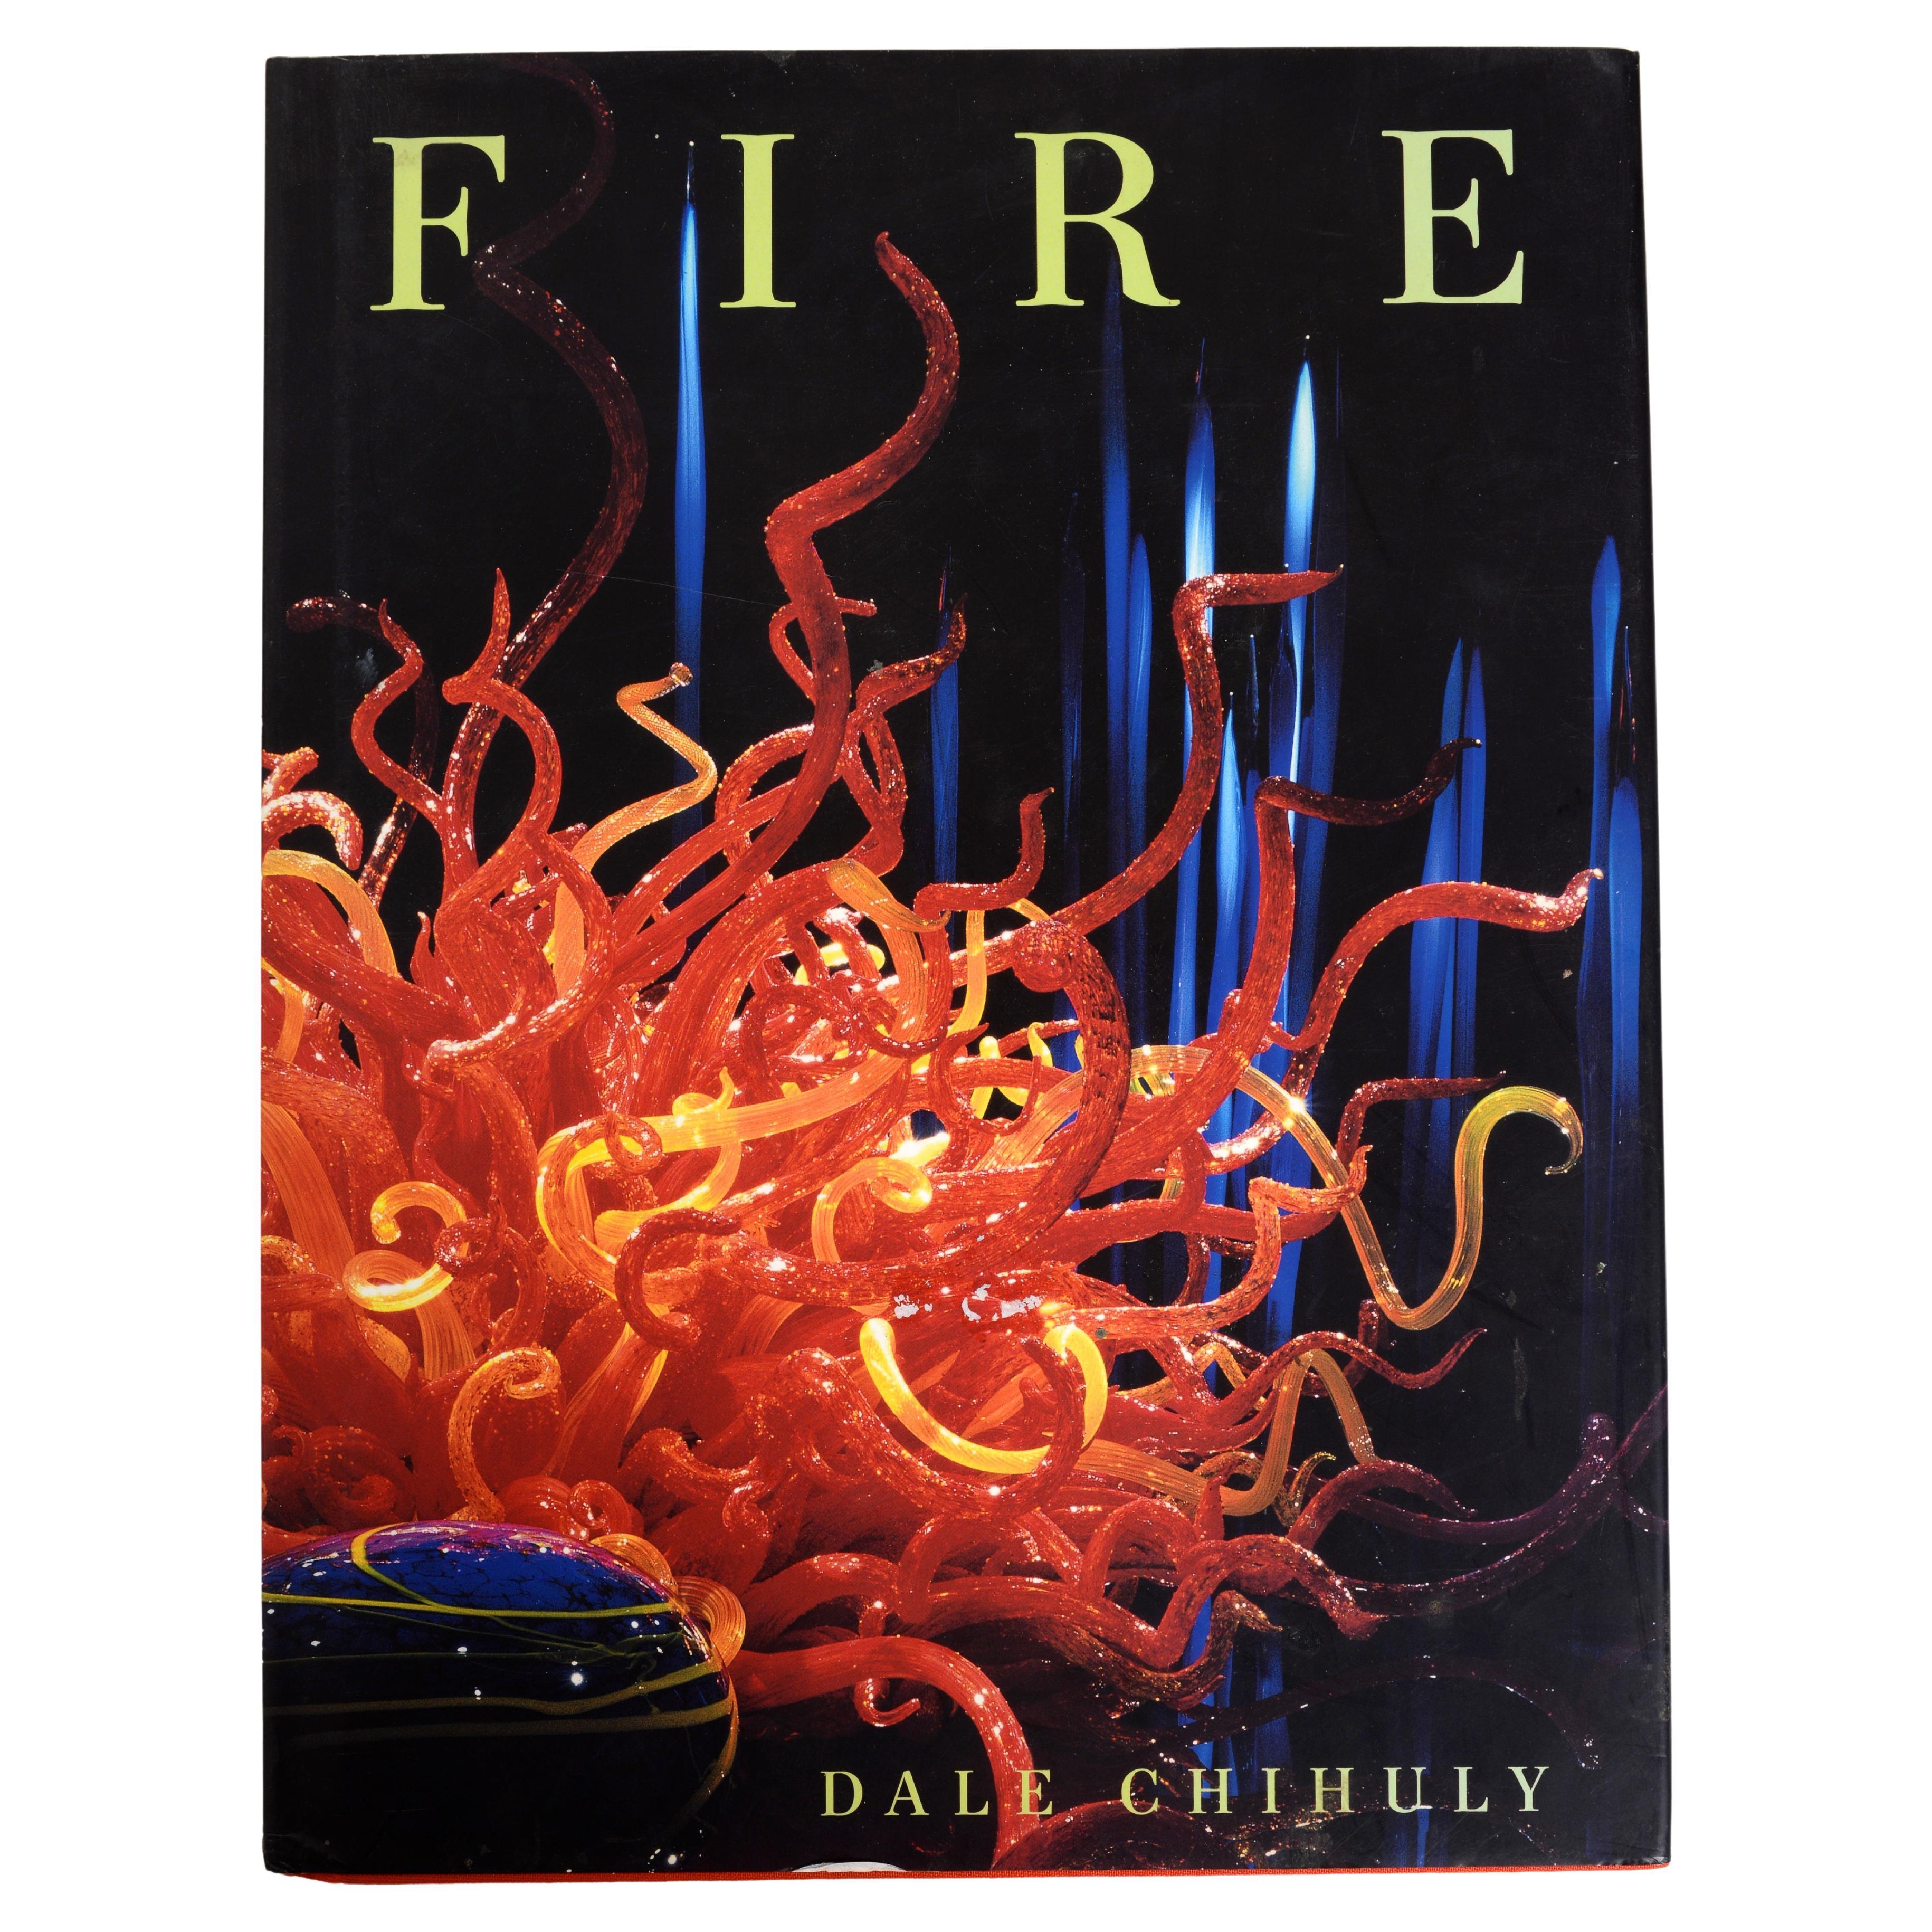 Fire by Dale Chihuly, Stated 1st Limited Ed, 1/10000